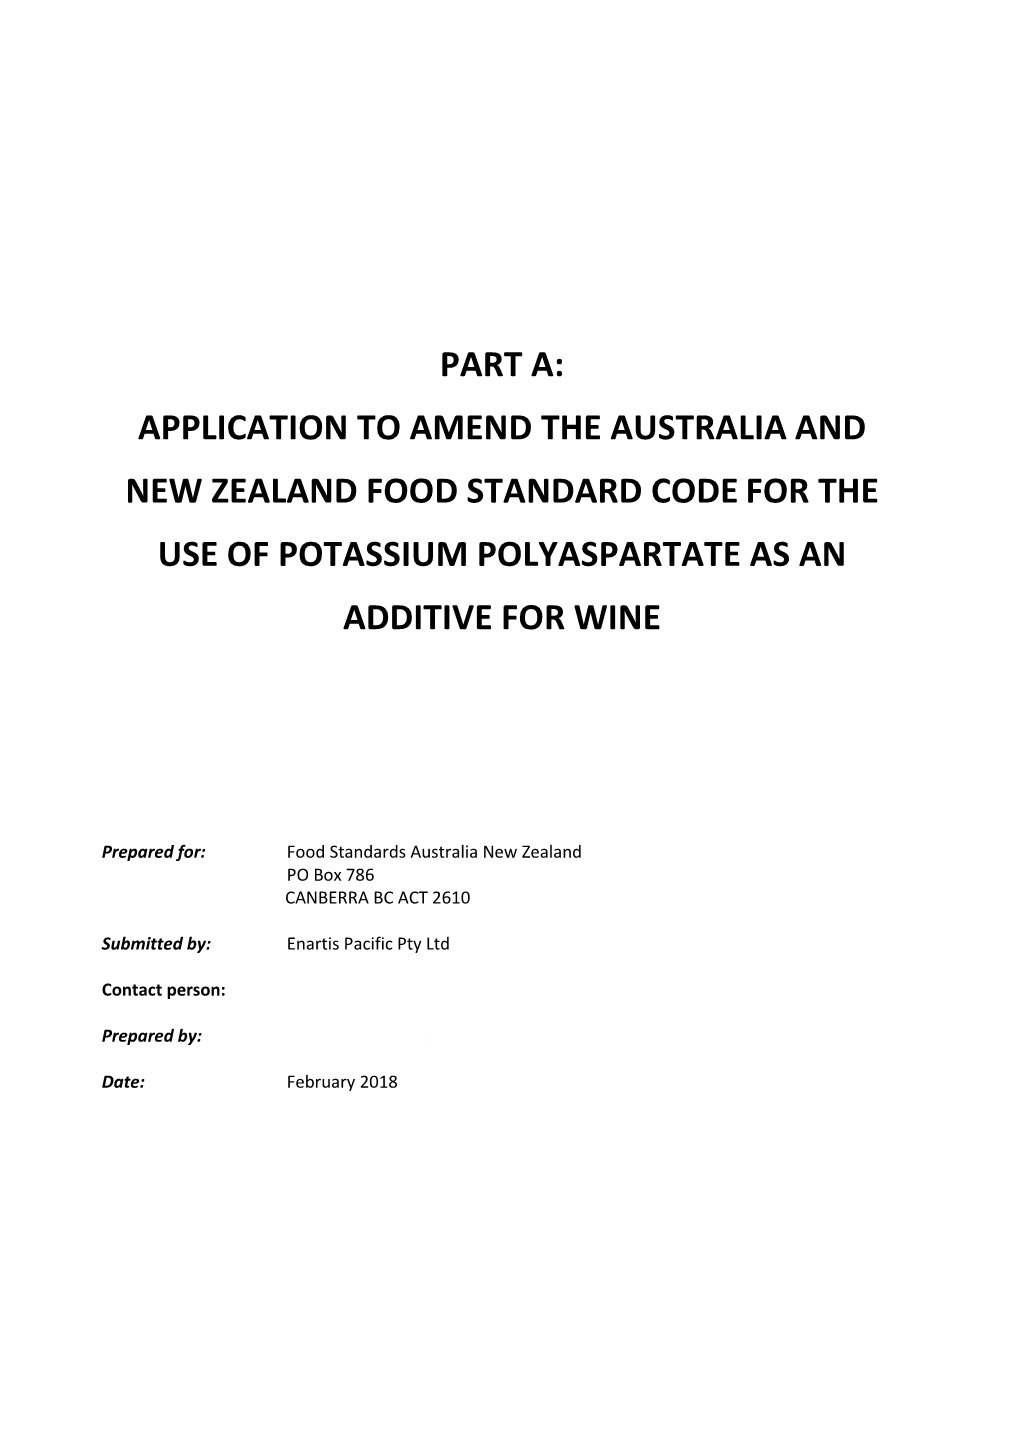 Application to Amend the Australia and New Zealand Food Standard Code for the Use of Potassium Polyaspartate As an Additive for Wine